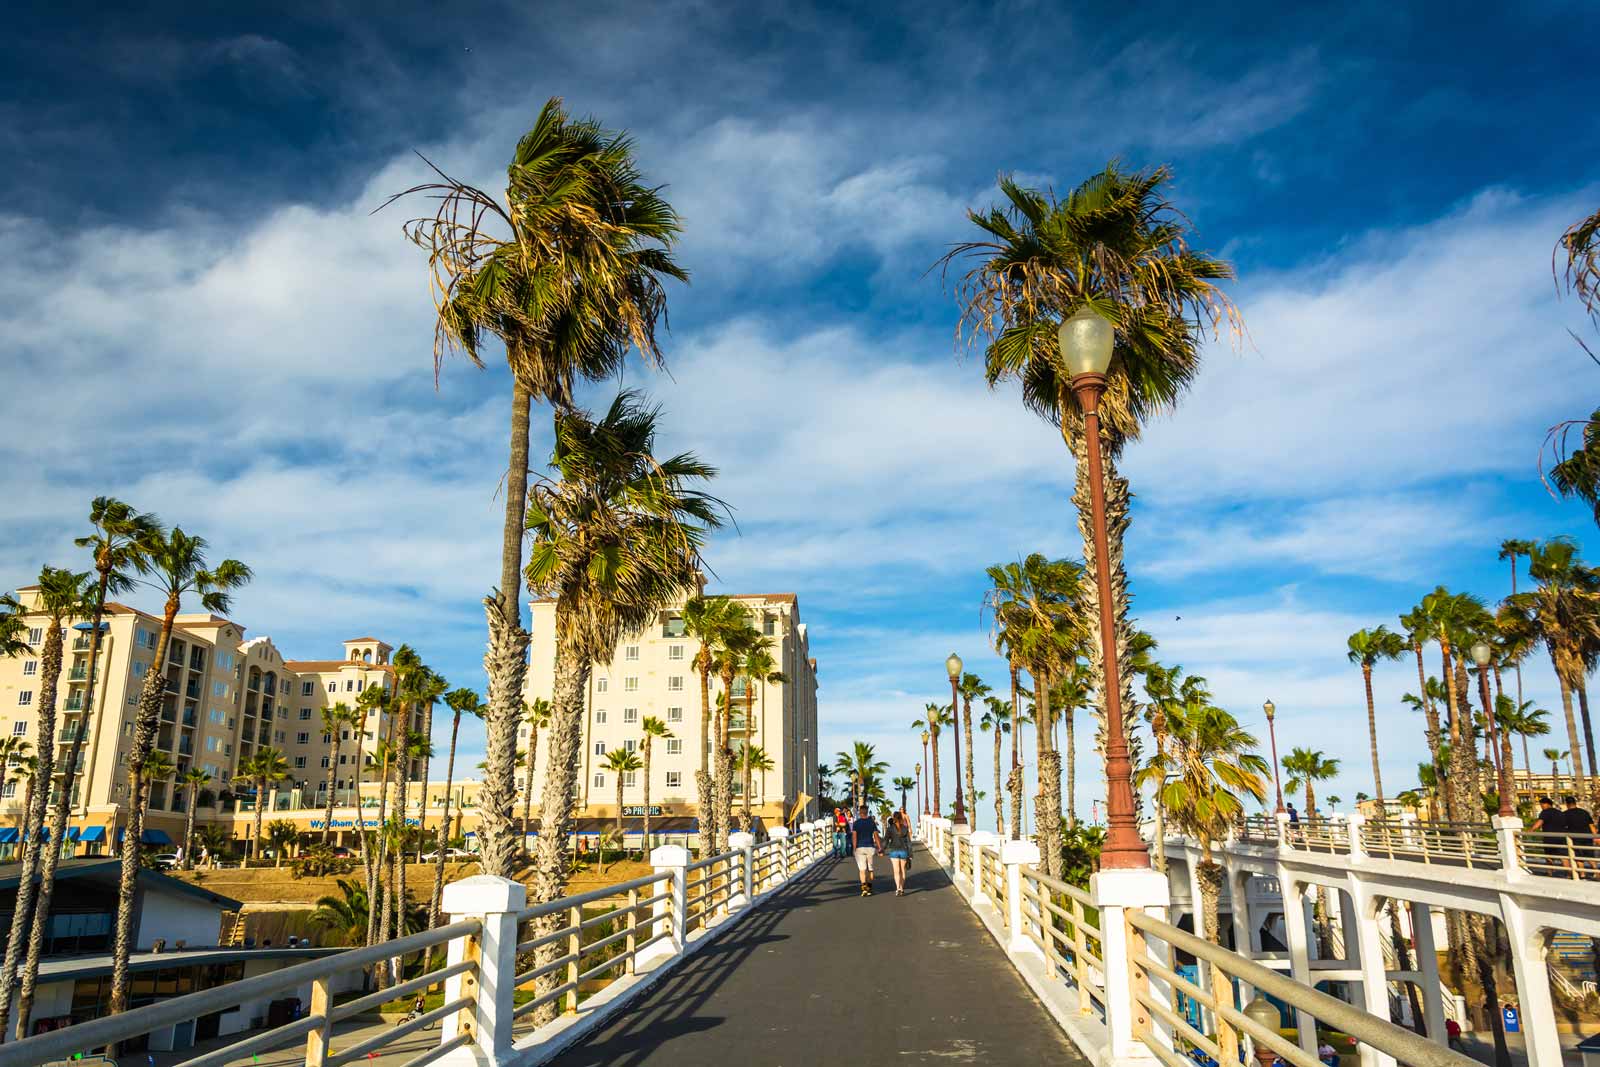 Exploring The Changing Landscape Of Oceanside, California